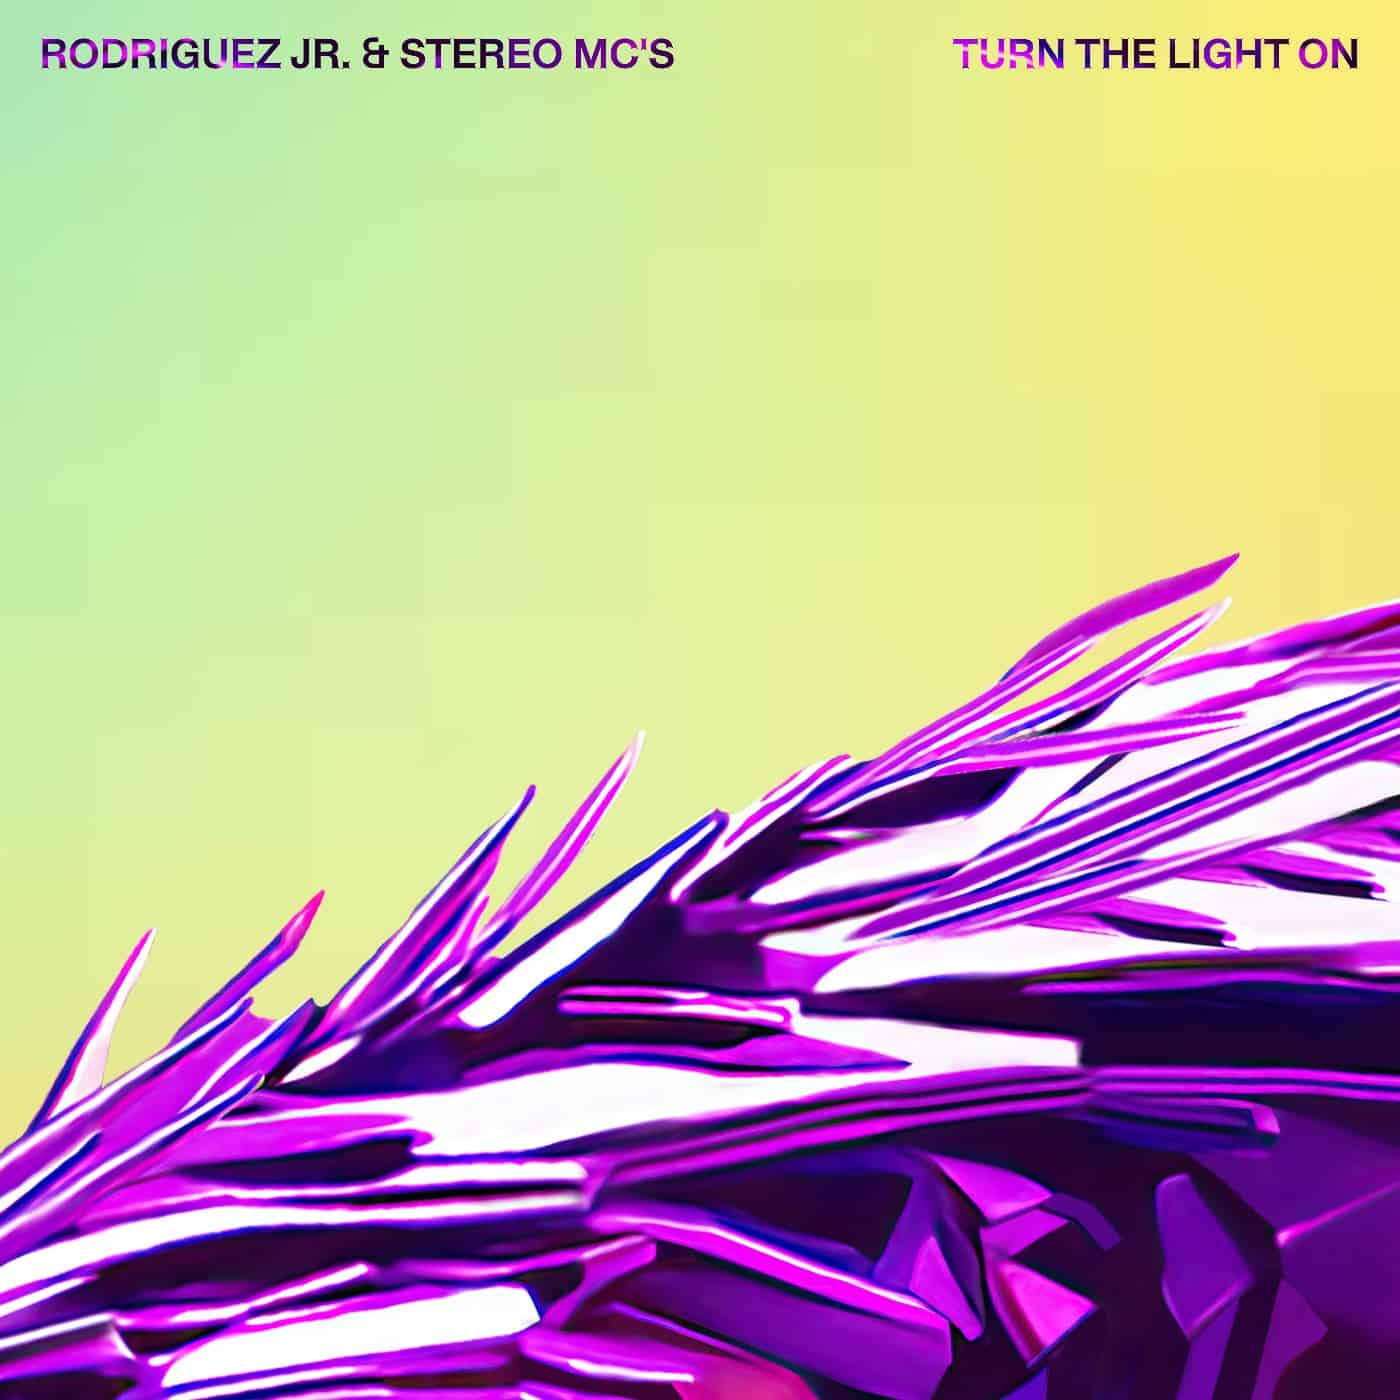 image cover: Stereo MC's, Rodriguez Jr. - Turn The Light On / F&B002